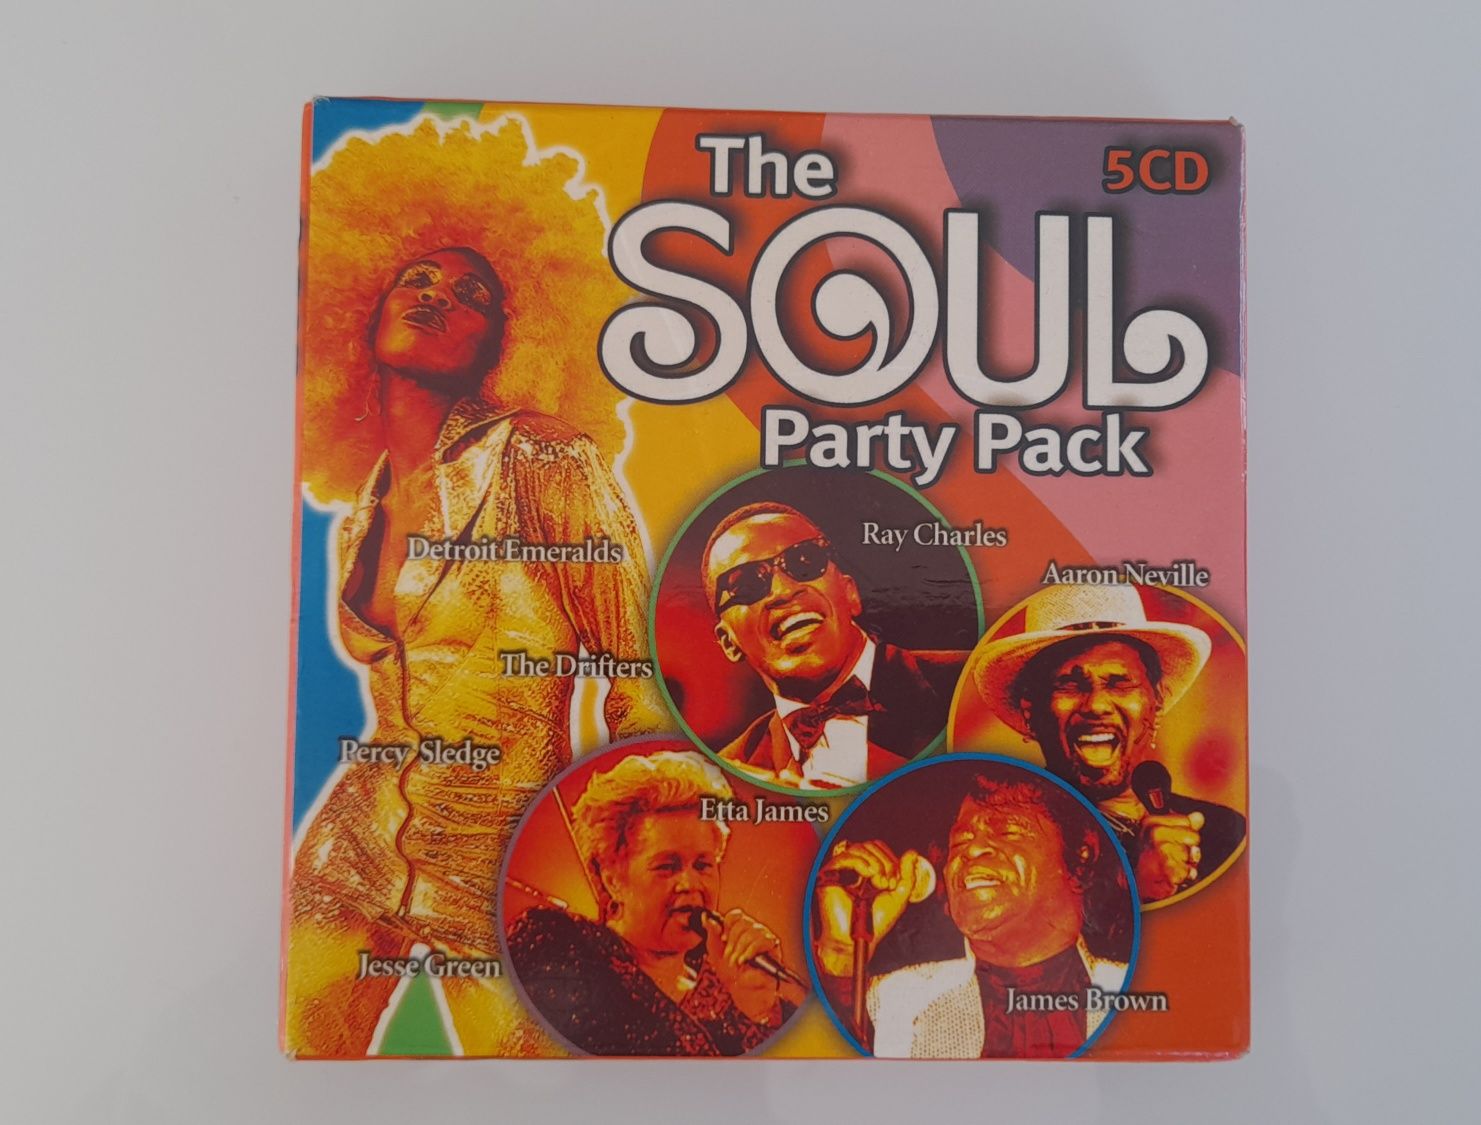 The Soul Party Pack